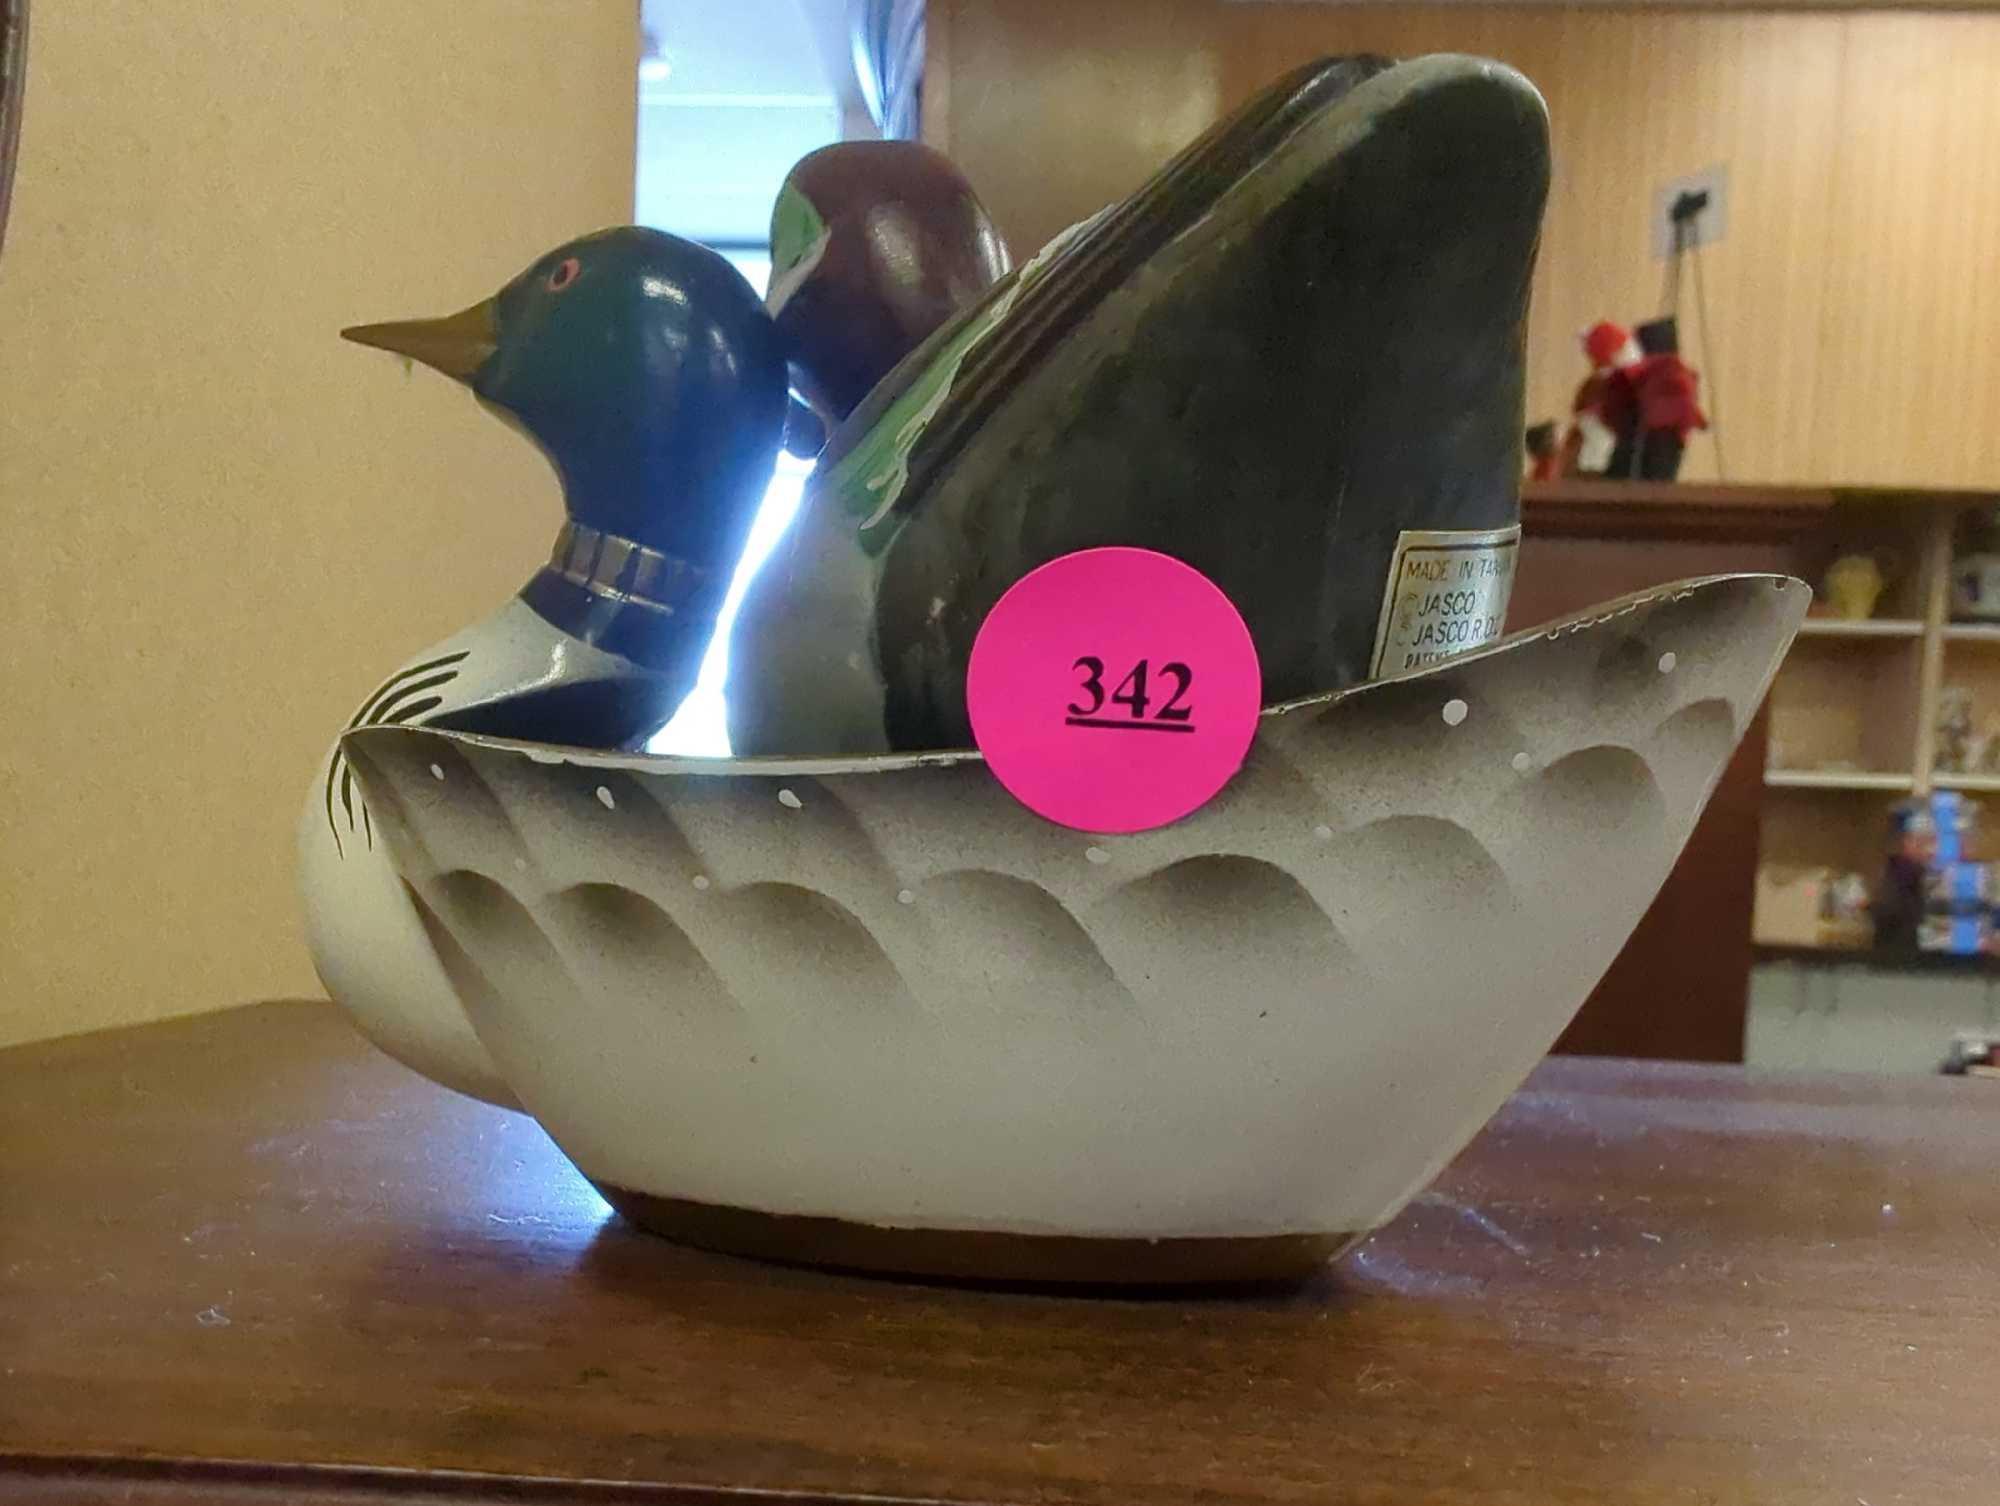 Lot of 2 Items To Include, Vintage Metal Loon Duck Oval Shaped Bowl Dish Hand Painted Brass Made in